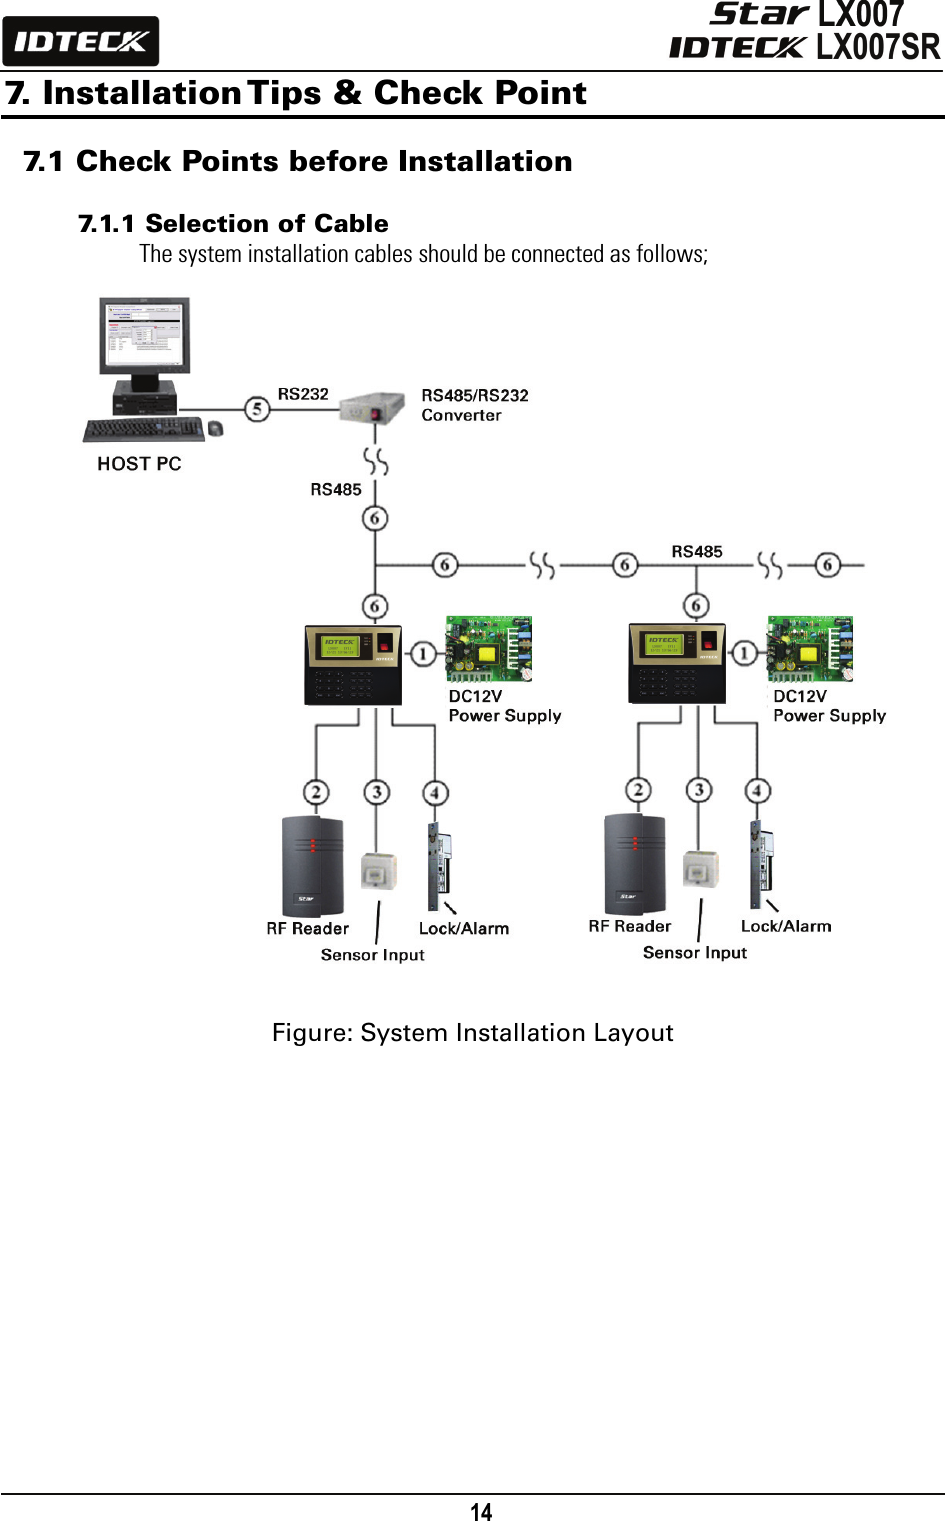                                                                                    14      7. Installation Tips &amp; Check Point  7.1 Check Points before Installation  7.1.1 Selection of Cable   The system installation cables should be connected as follows;                           Figure: System Installation Layout  